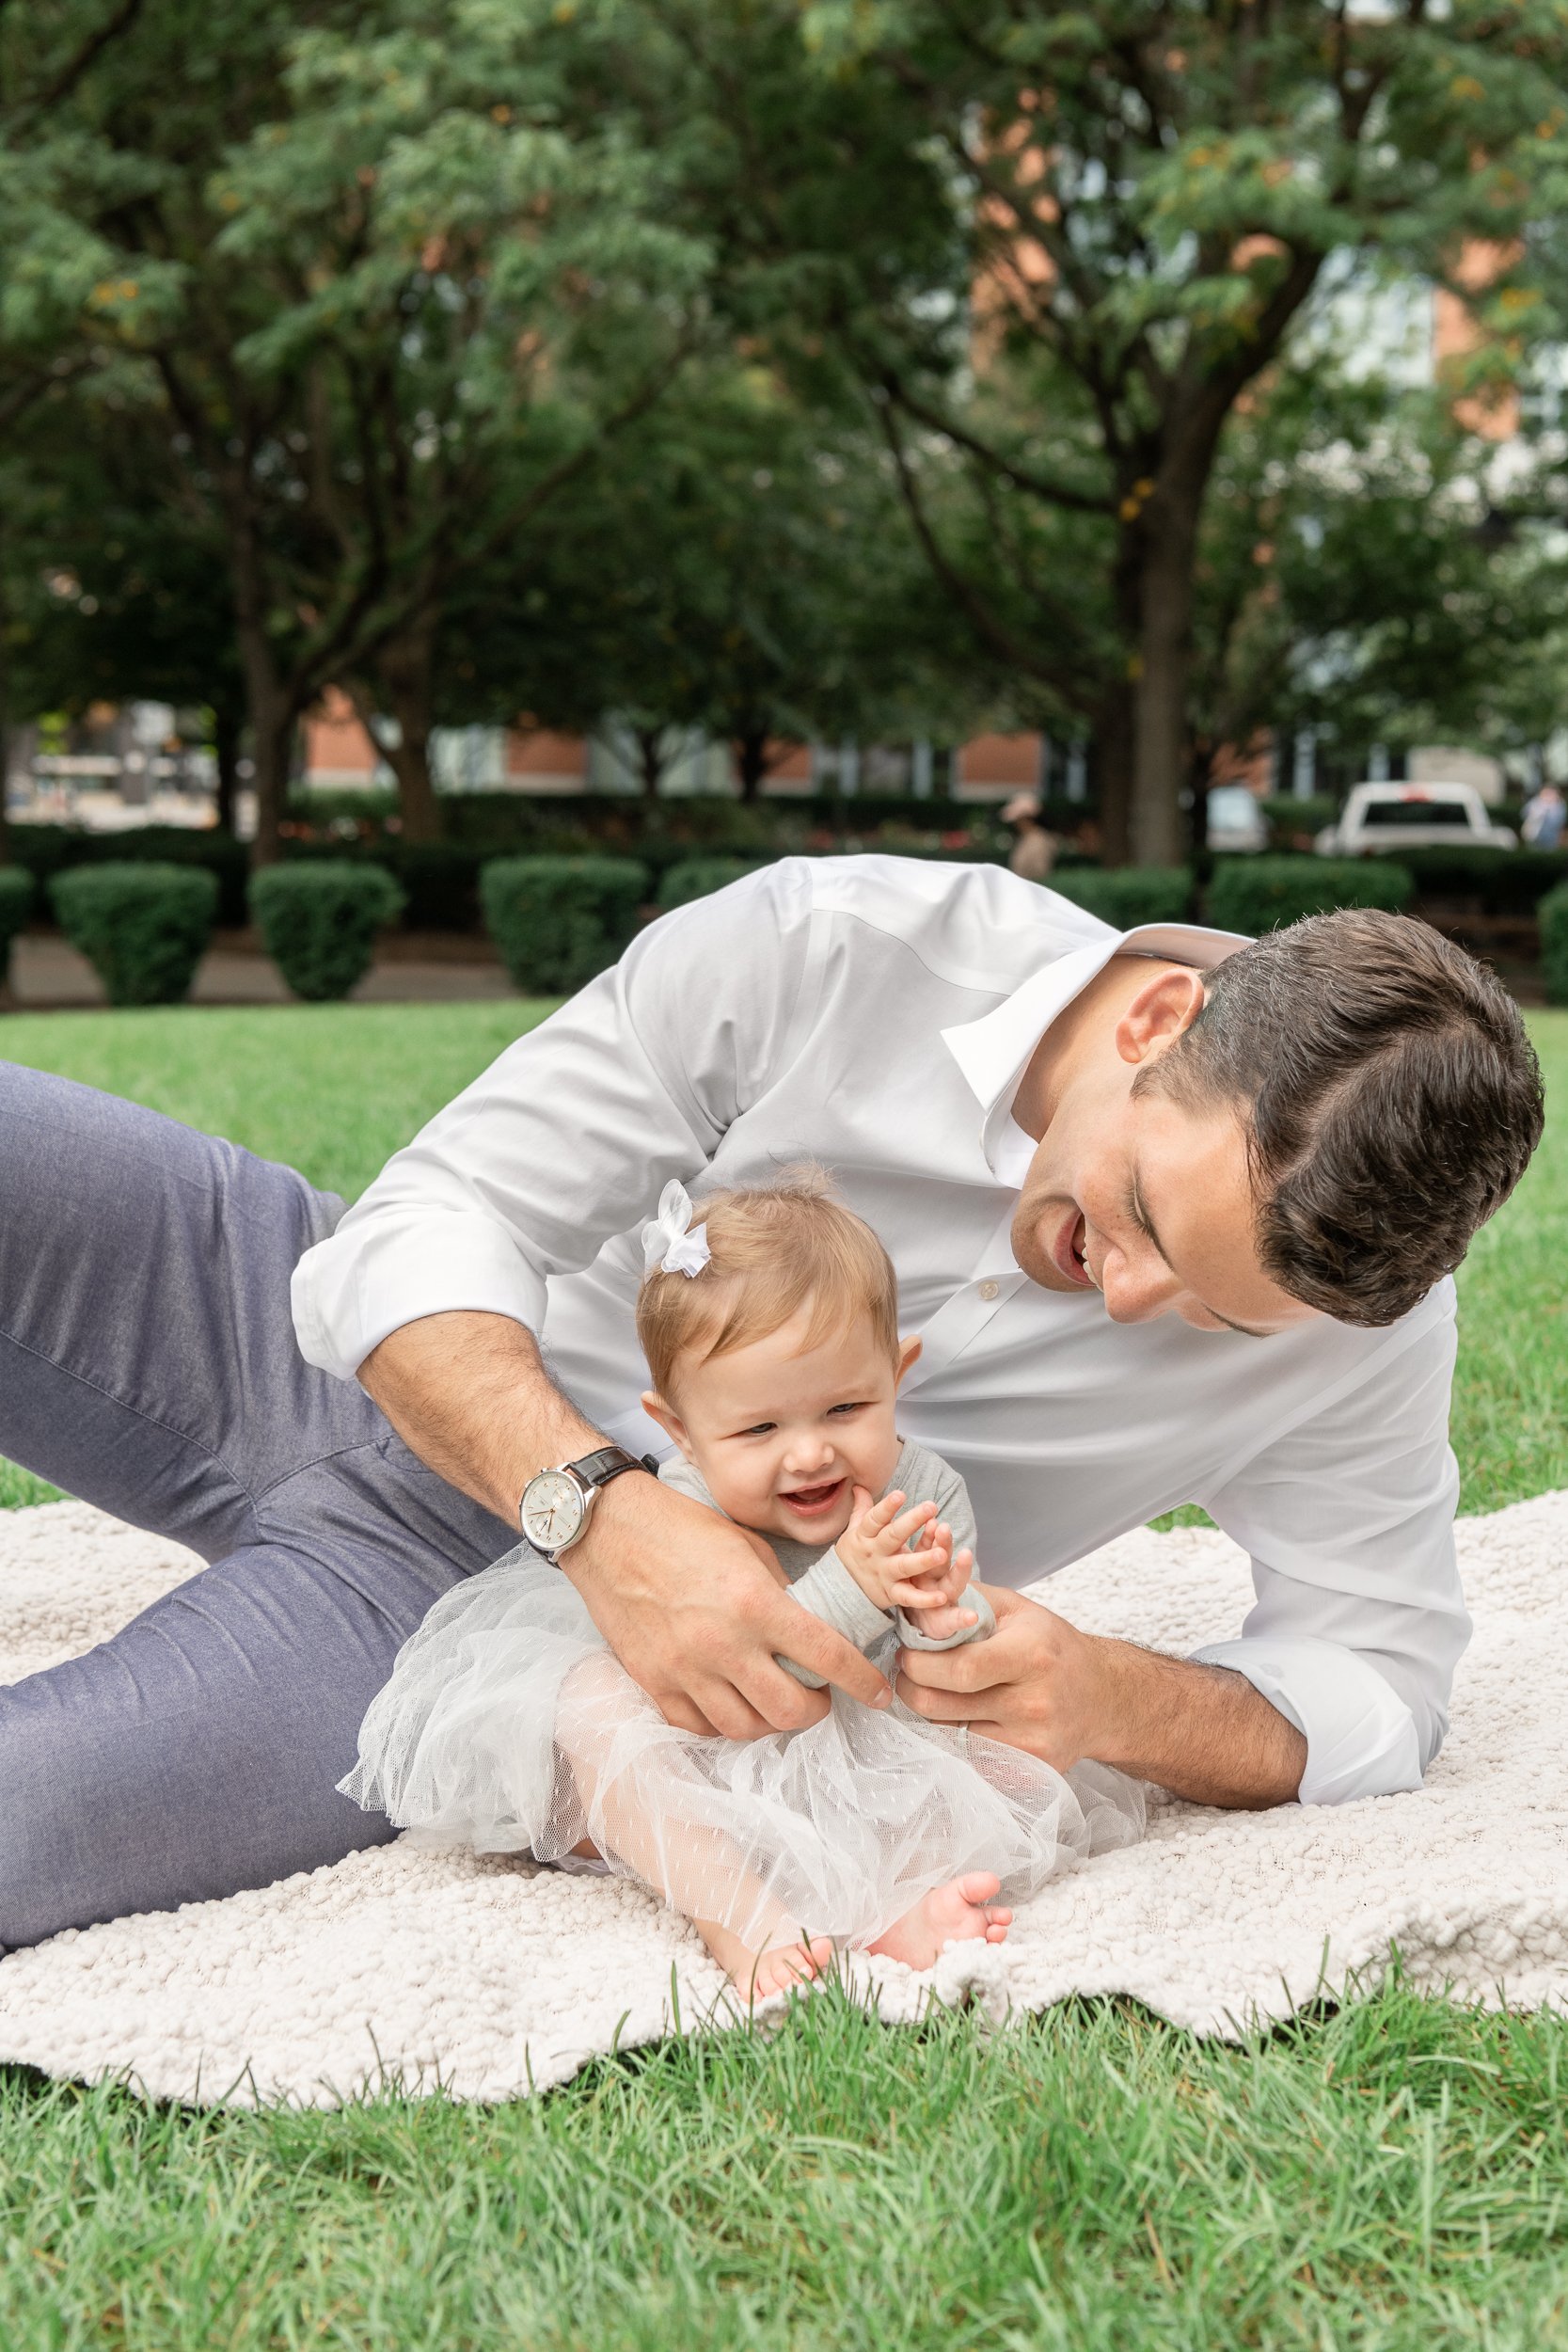  A new father helps his baby girl clap her hands in a New Jersey Park in the summer. gray tulle baby dress men's family picture outfits infant girl #nicolehawkinsphotography #newjerseyphotographers #familyphotographer #6monthportraits #NJfamilyphotos